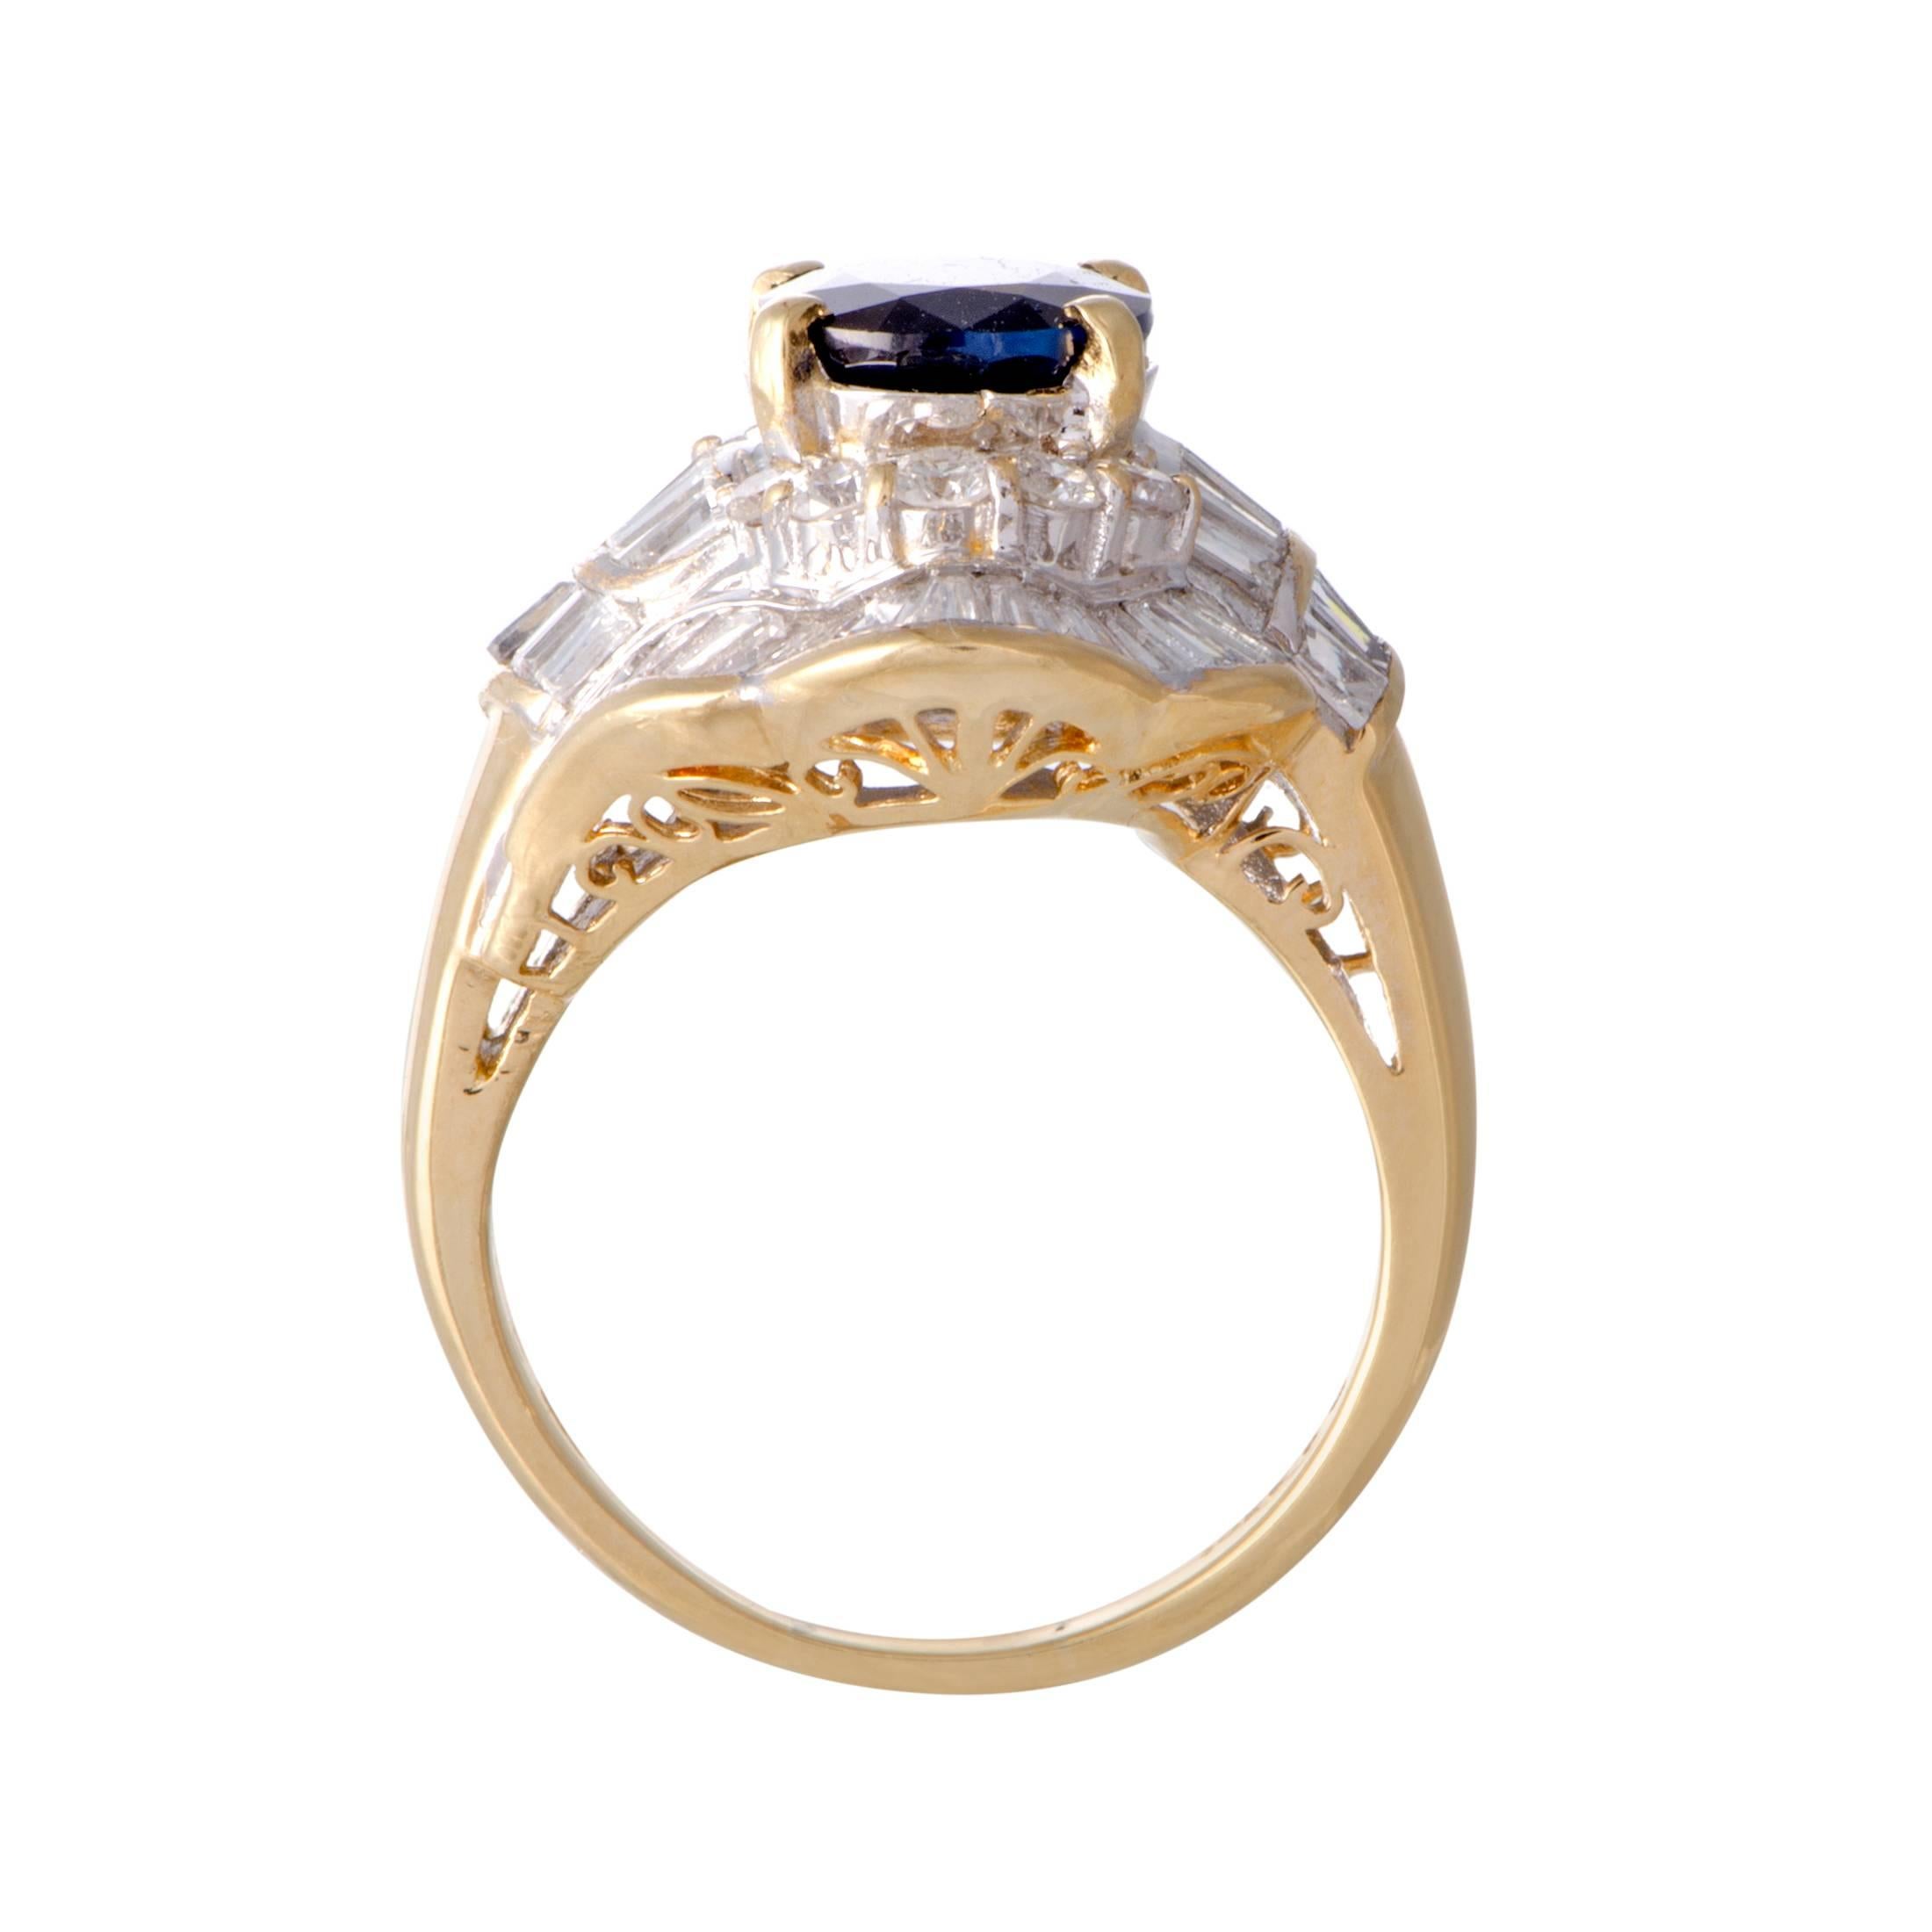 Neatly set in 18K white and yellow gold, the diversely cut diamond stones perfectly complement the eye-catching sapphire in this sumptuous ring. The sapphire weighs 2.28 carats and the diamonds total 2.33 carats.
Ring Size 6.25
Band 3mm
Top